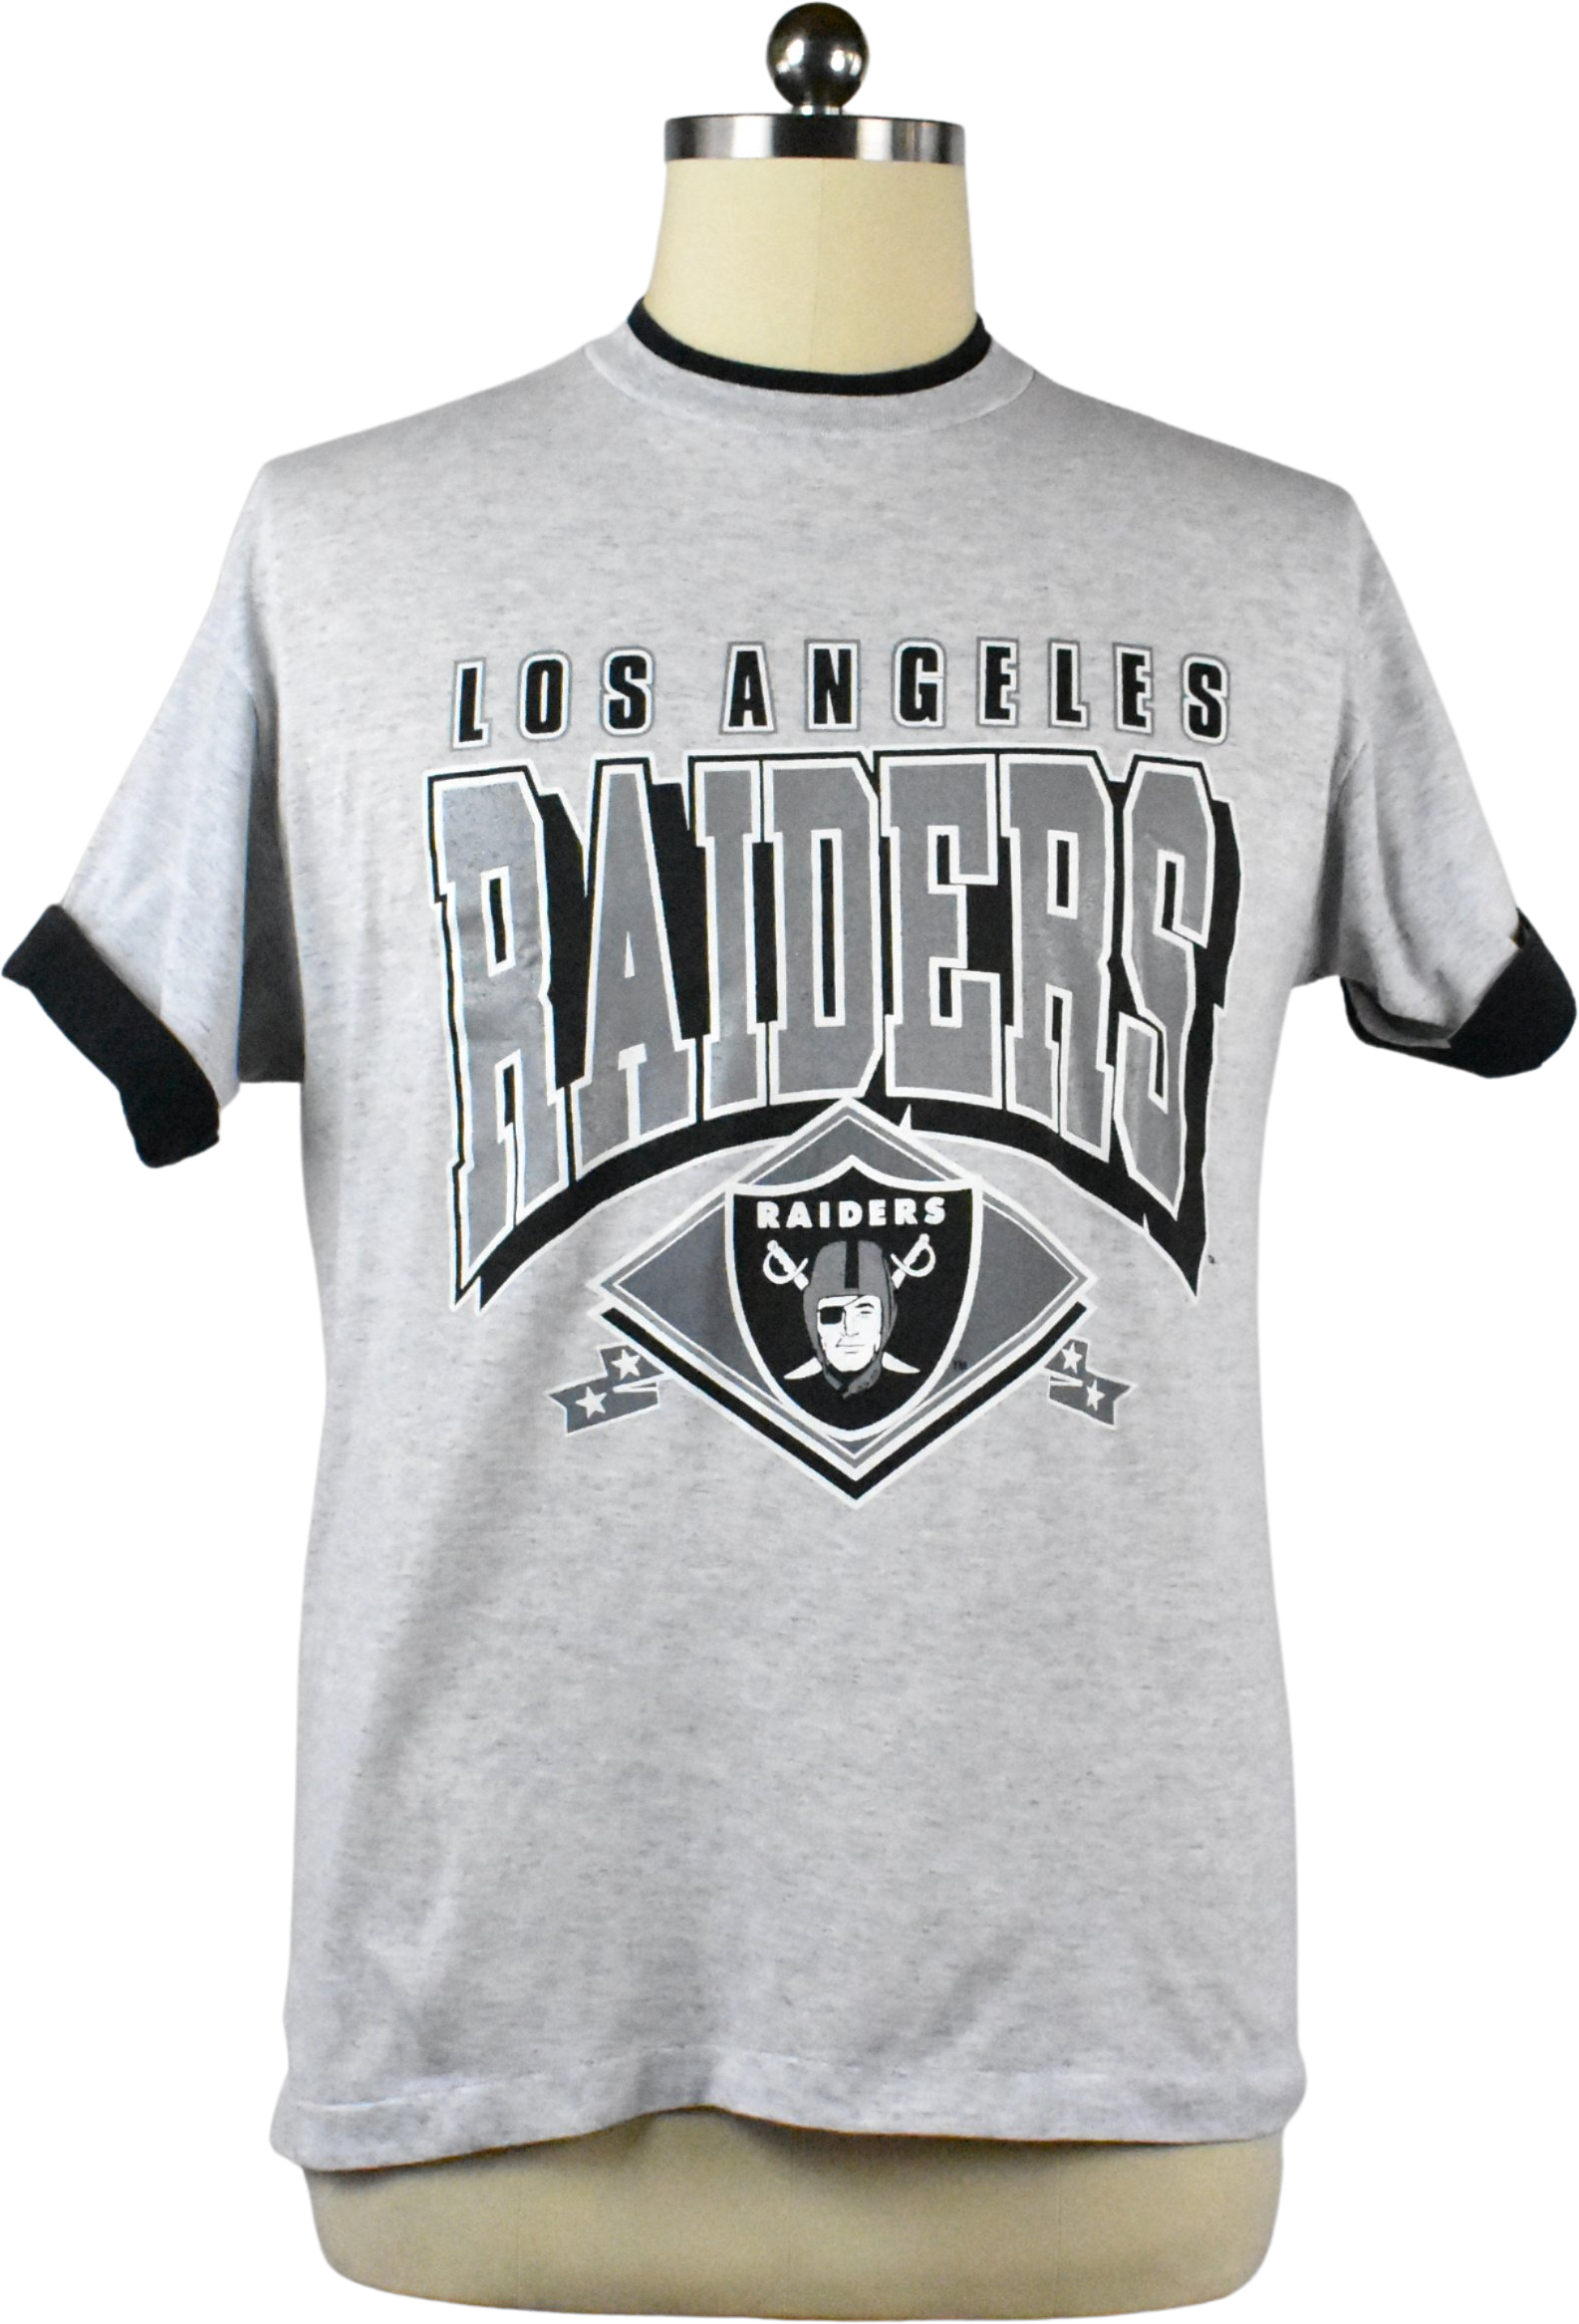 Vintage Los Angeles Raiders Football T-Shirt by Trench Ultra